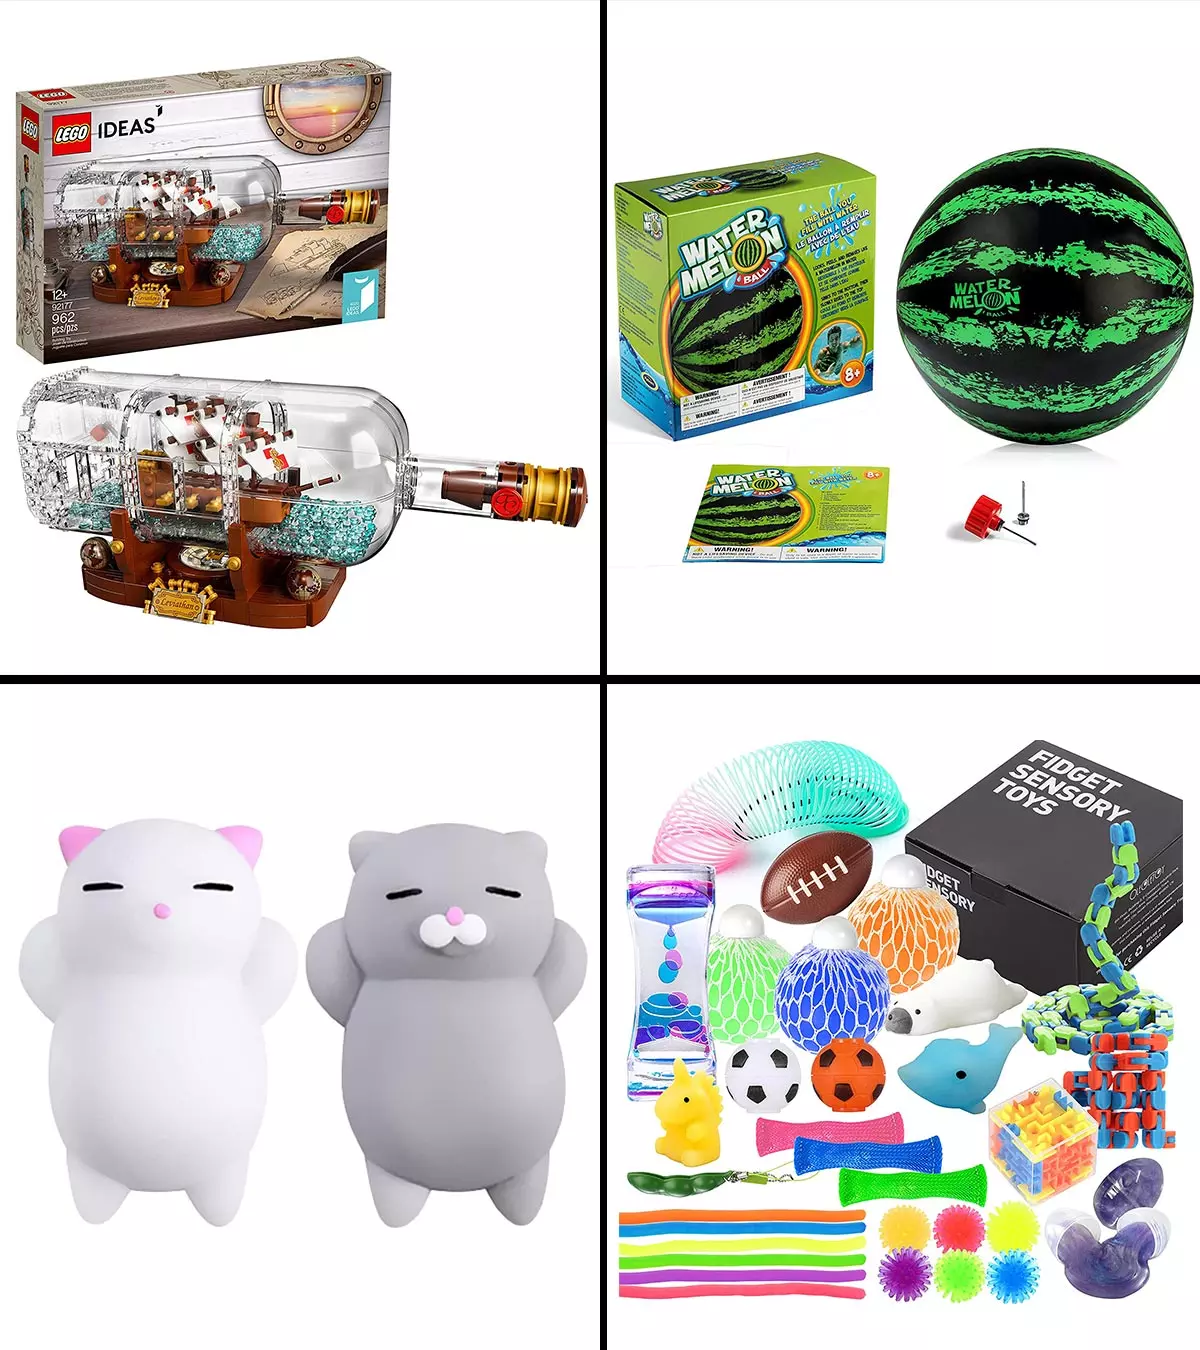 Fun, interactive, and science- and tech-driven toys ideal for teenagers.